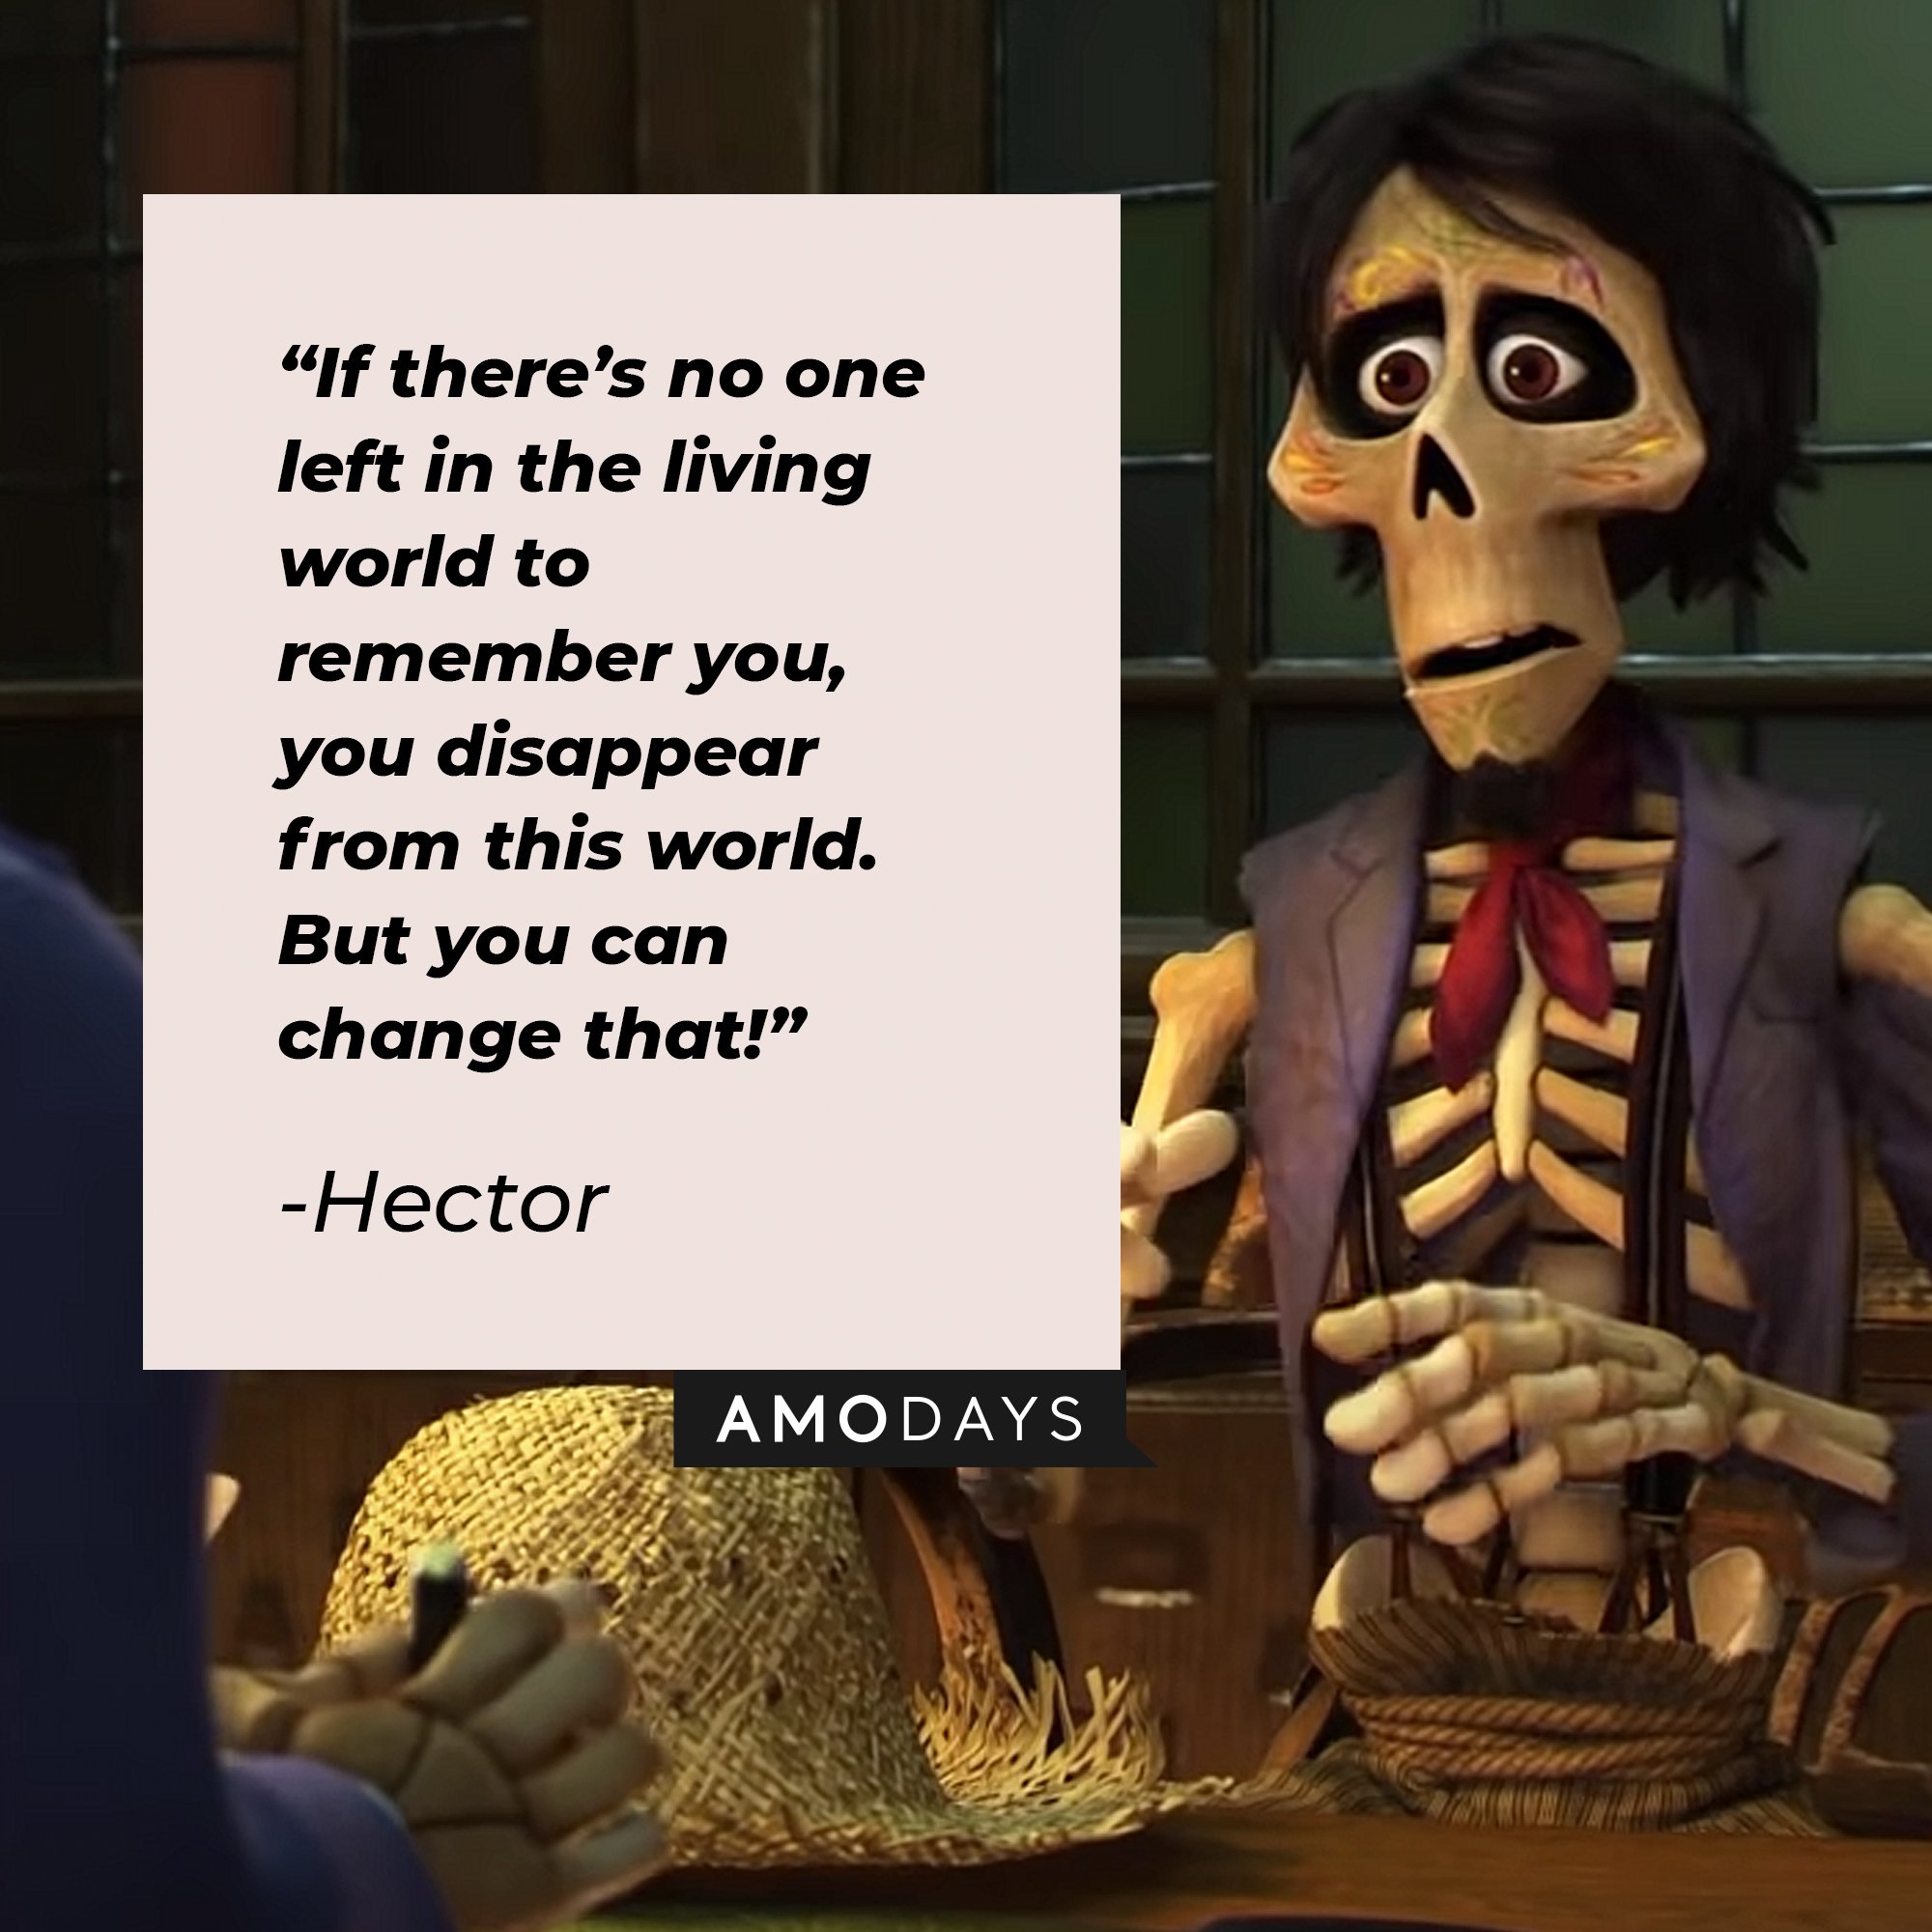 Hector's quote: “If there’s no one left in the living world to remember you, you disappear from this world. But you can change that!” | Image: AmoDays